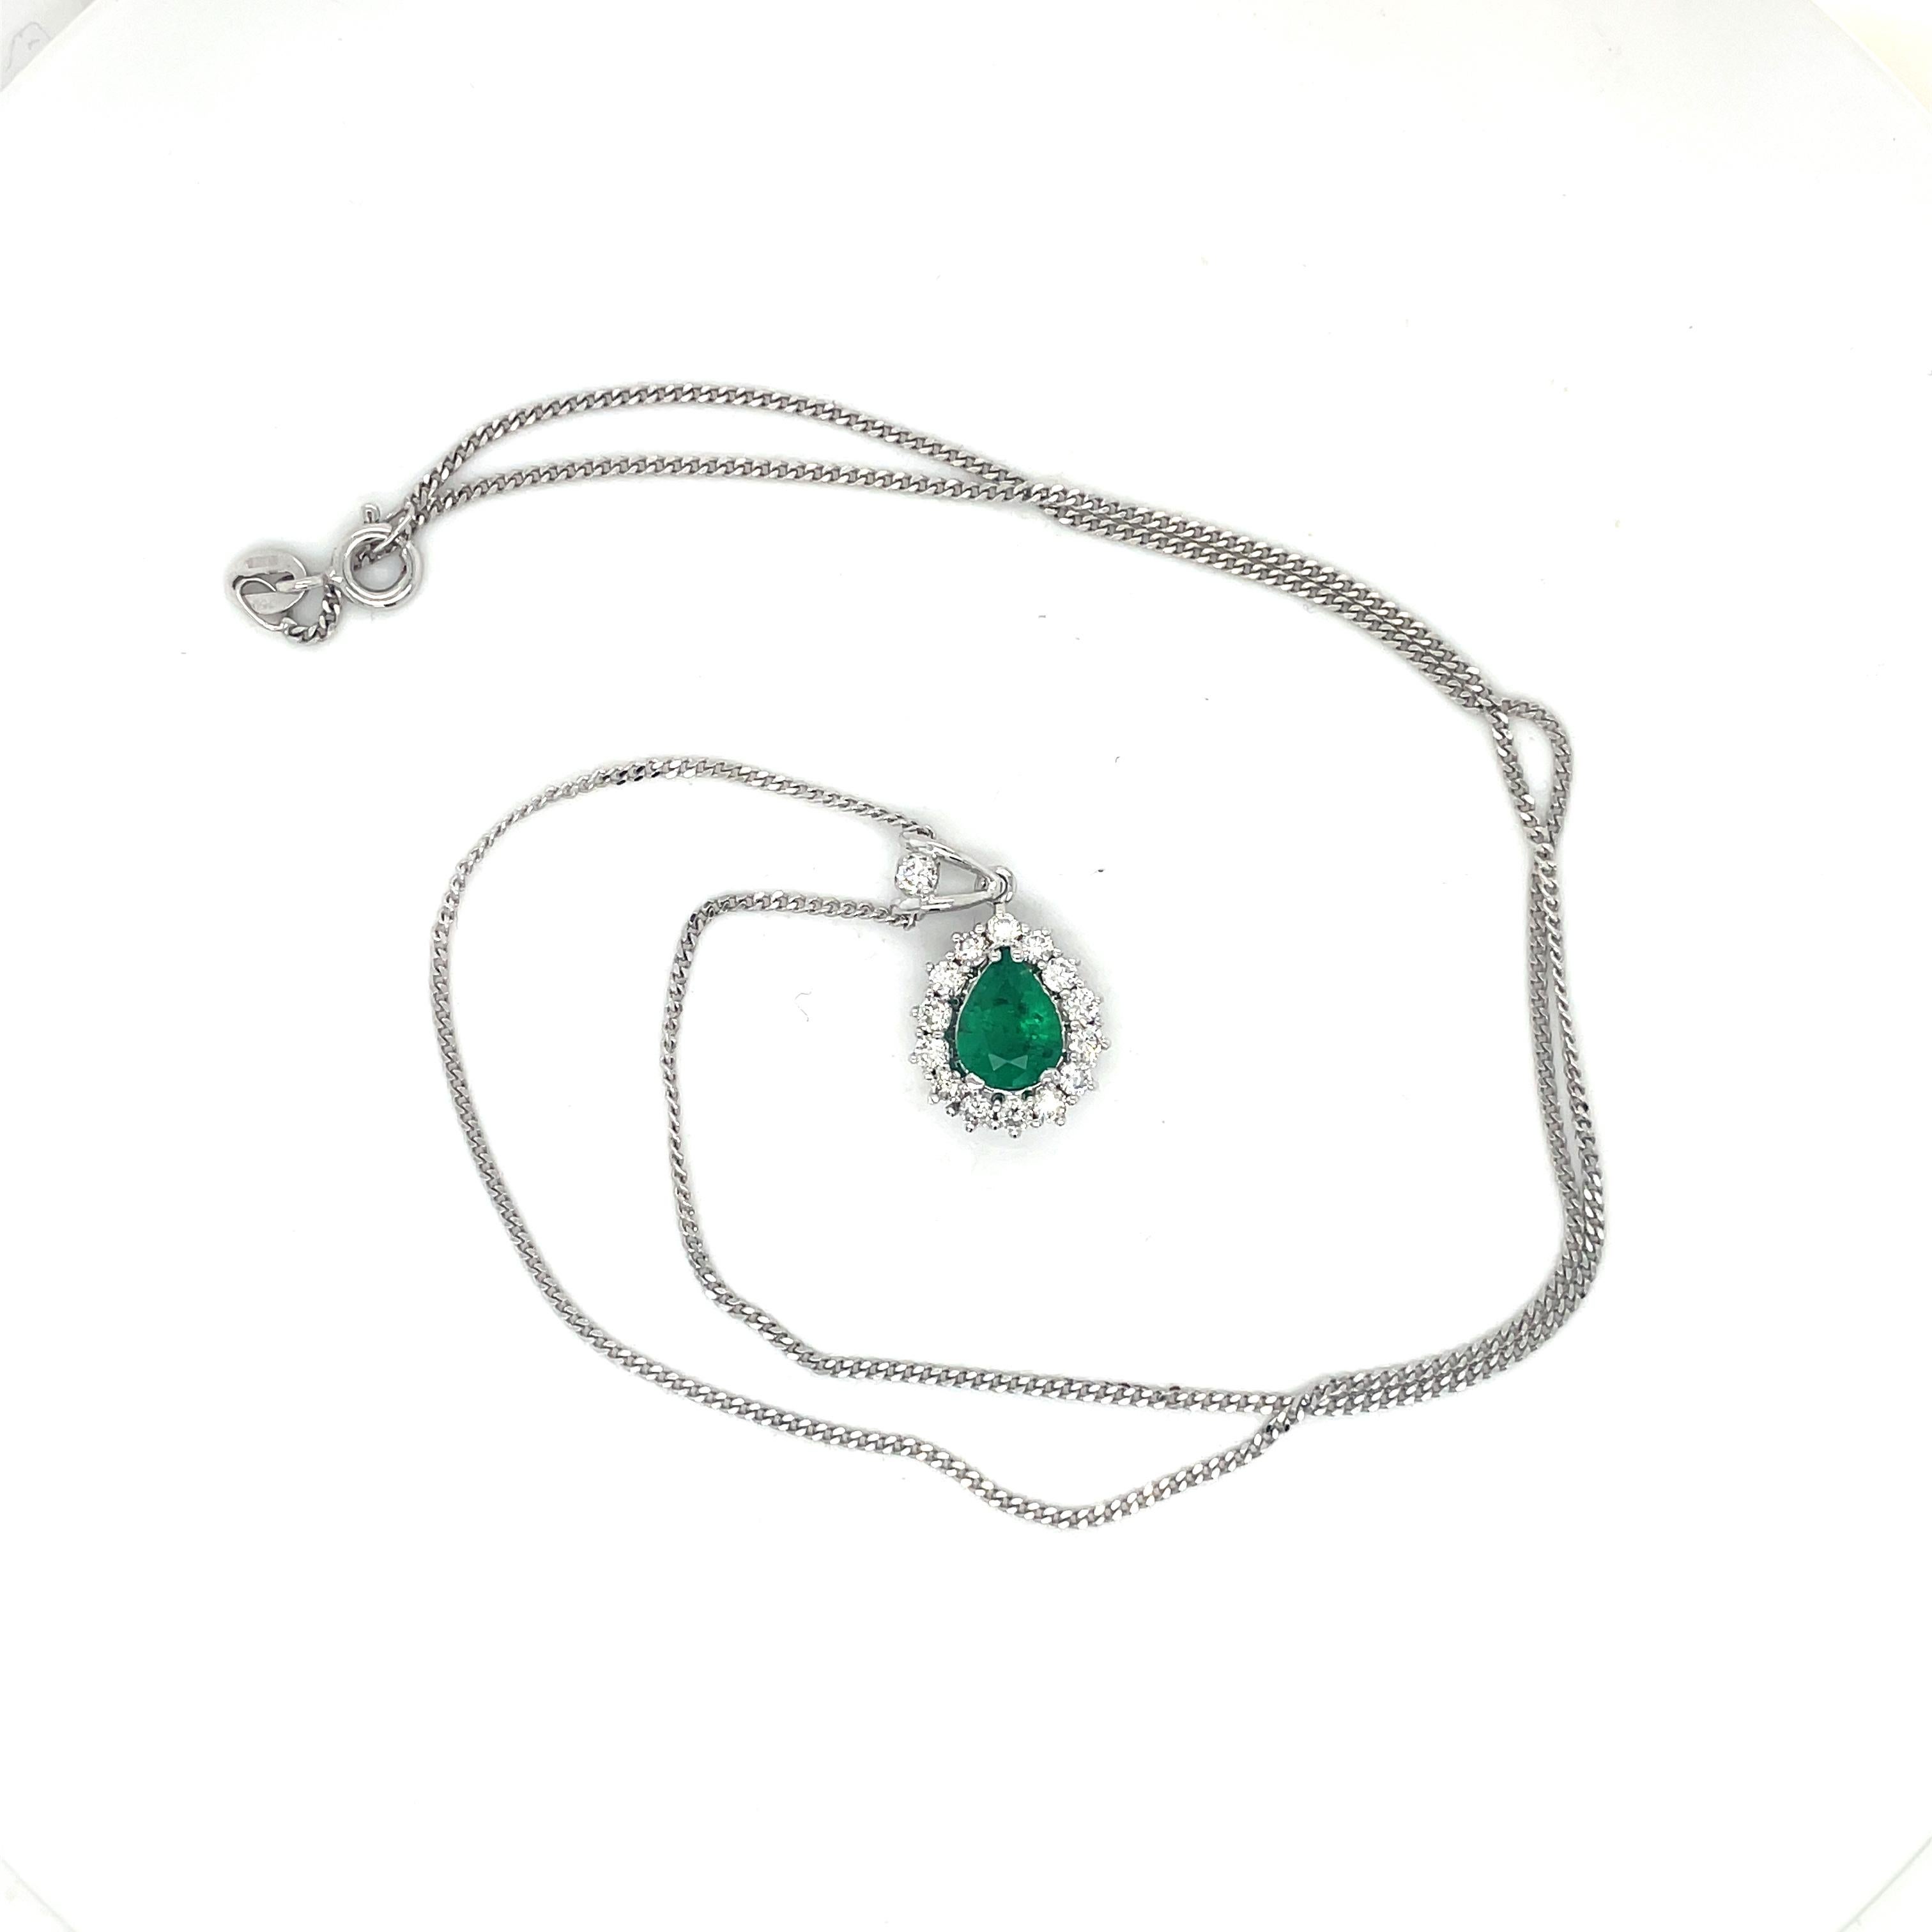 Emerald Necklace Pendant - 0.59ct Emerald and 0.5ct Diamond Halo, 18K White Gold In Excellent Condition For Sale In Ramat Gan, IL